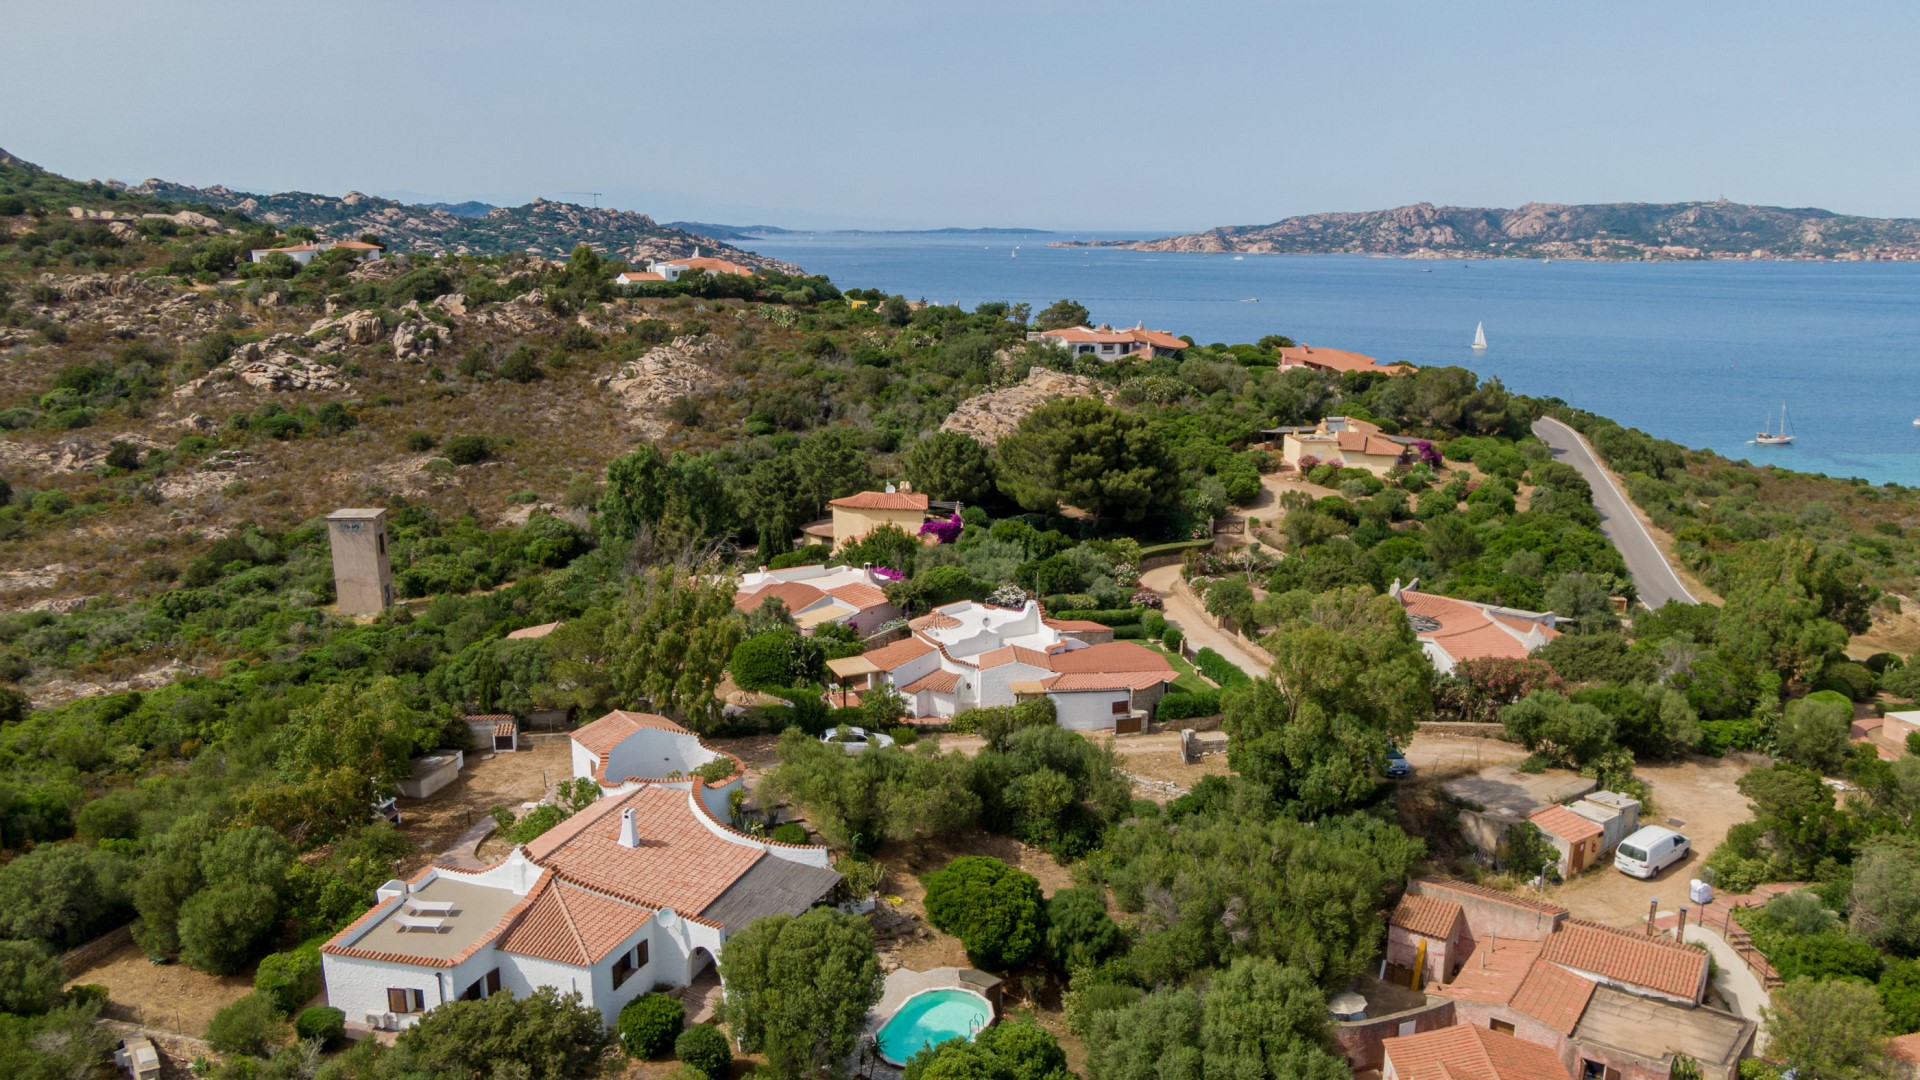 Luxury Villa Isa in Sardinia for Rent | Villa with private pool